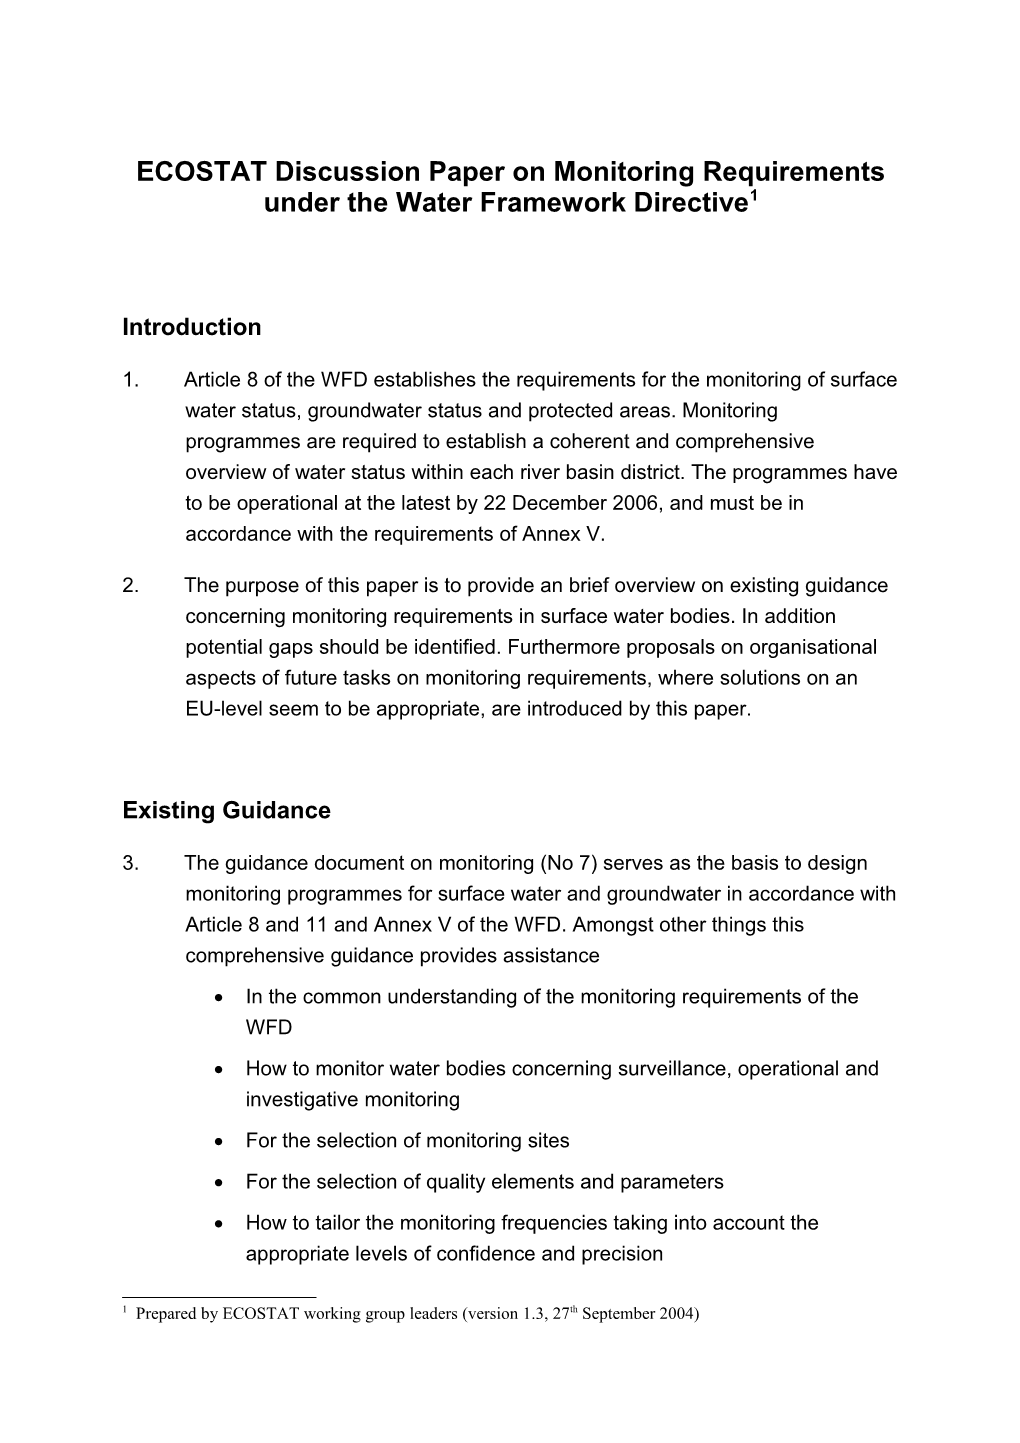 ECOSTAT Discussion Paper on Monitoring Requirements